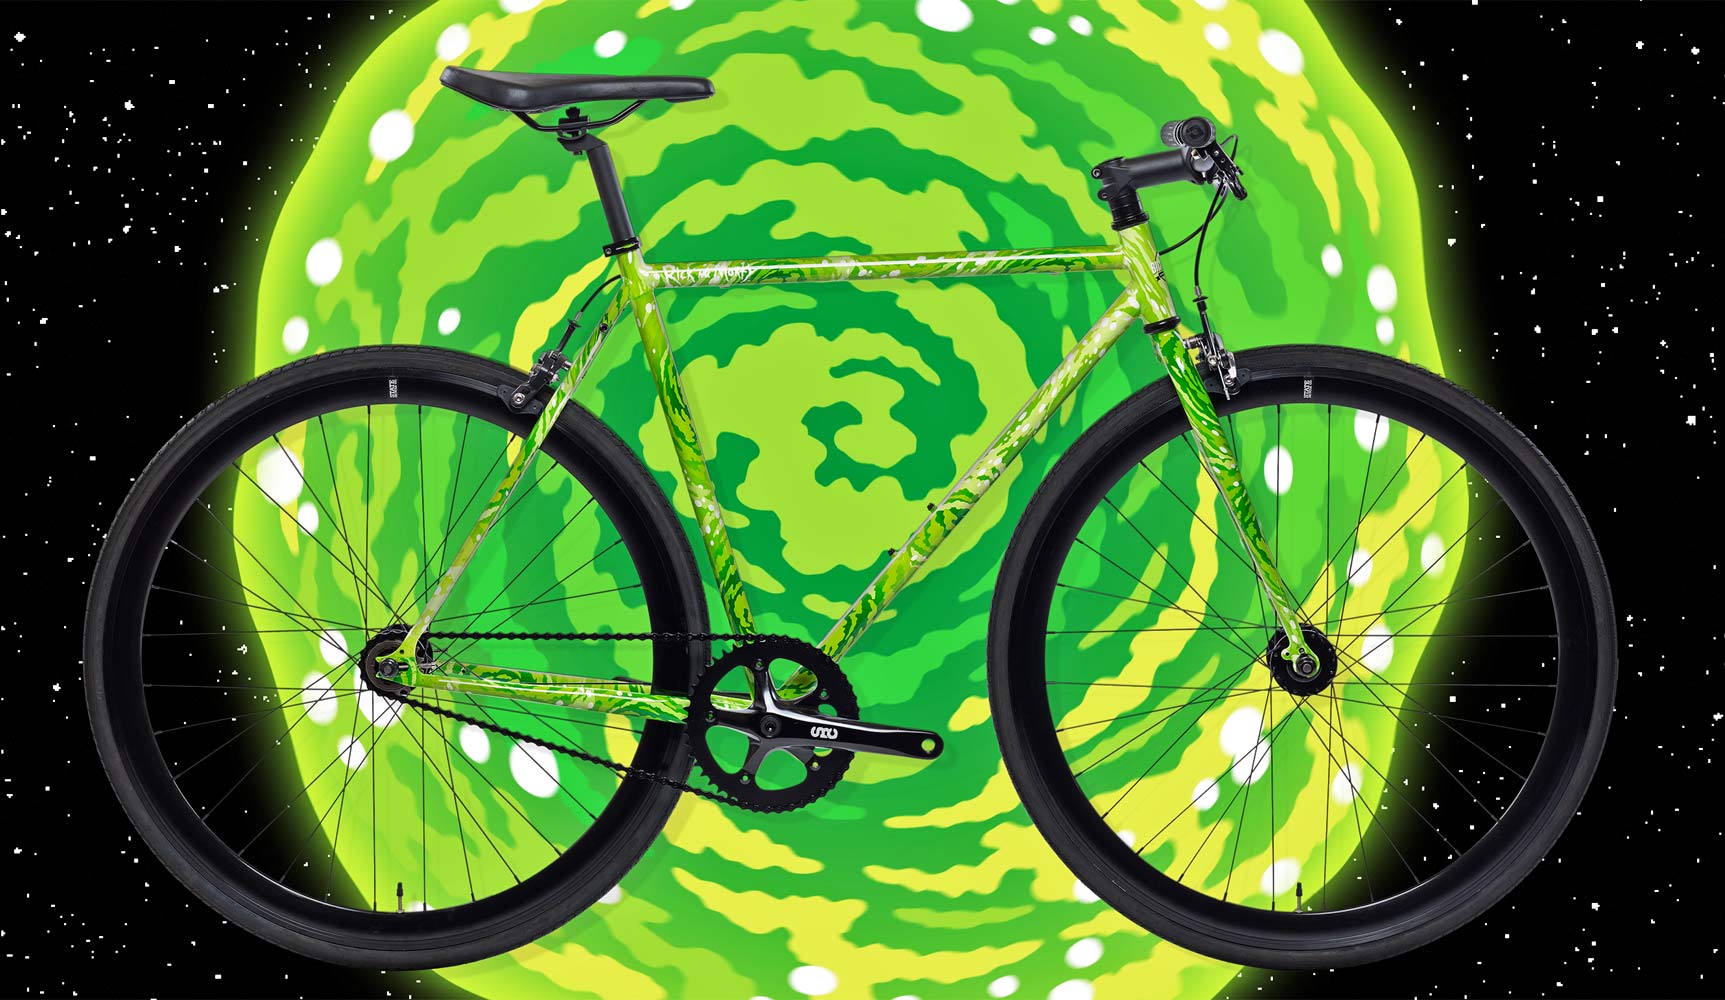 State Bicycle Co x Rick and Morty collection, limited edition interdimensional portal bikes clothing accessories, spiral